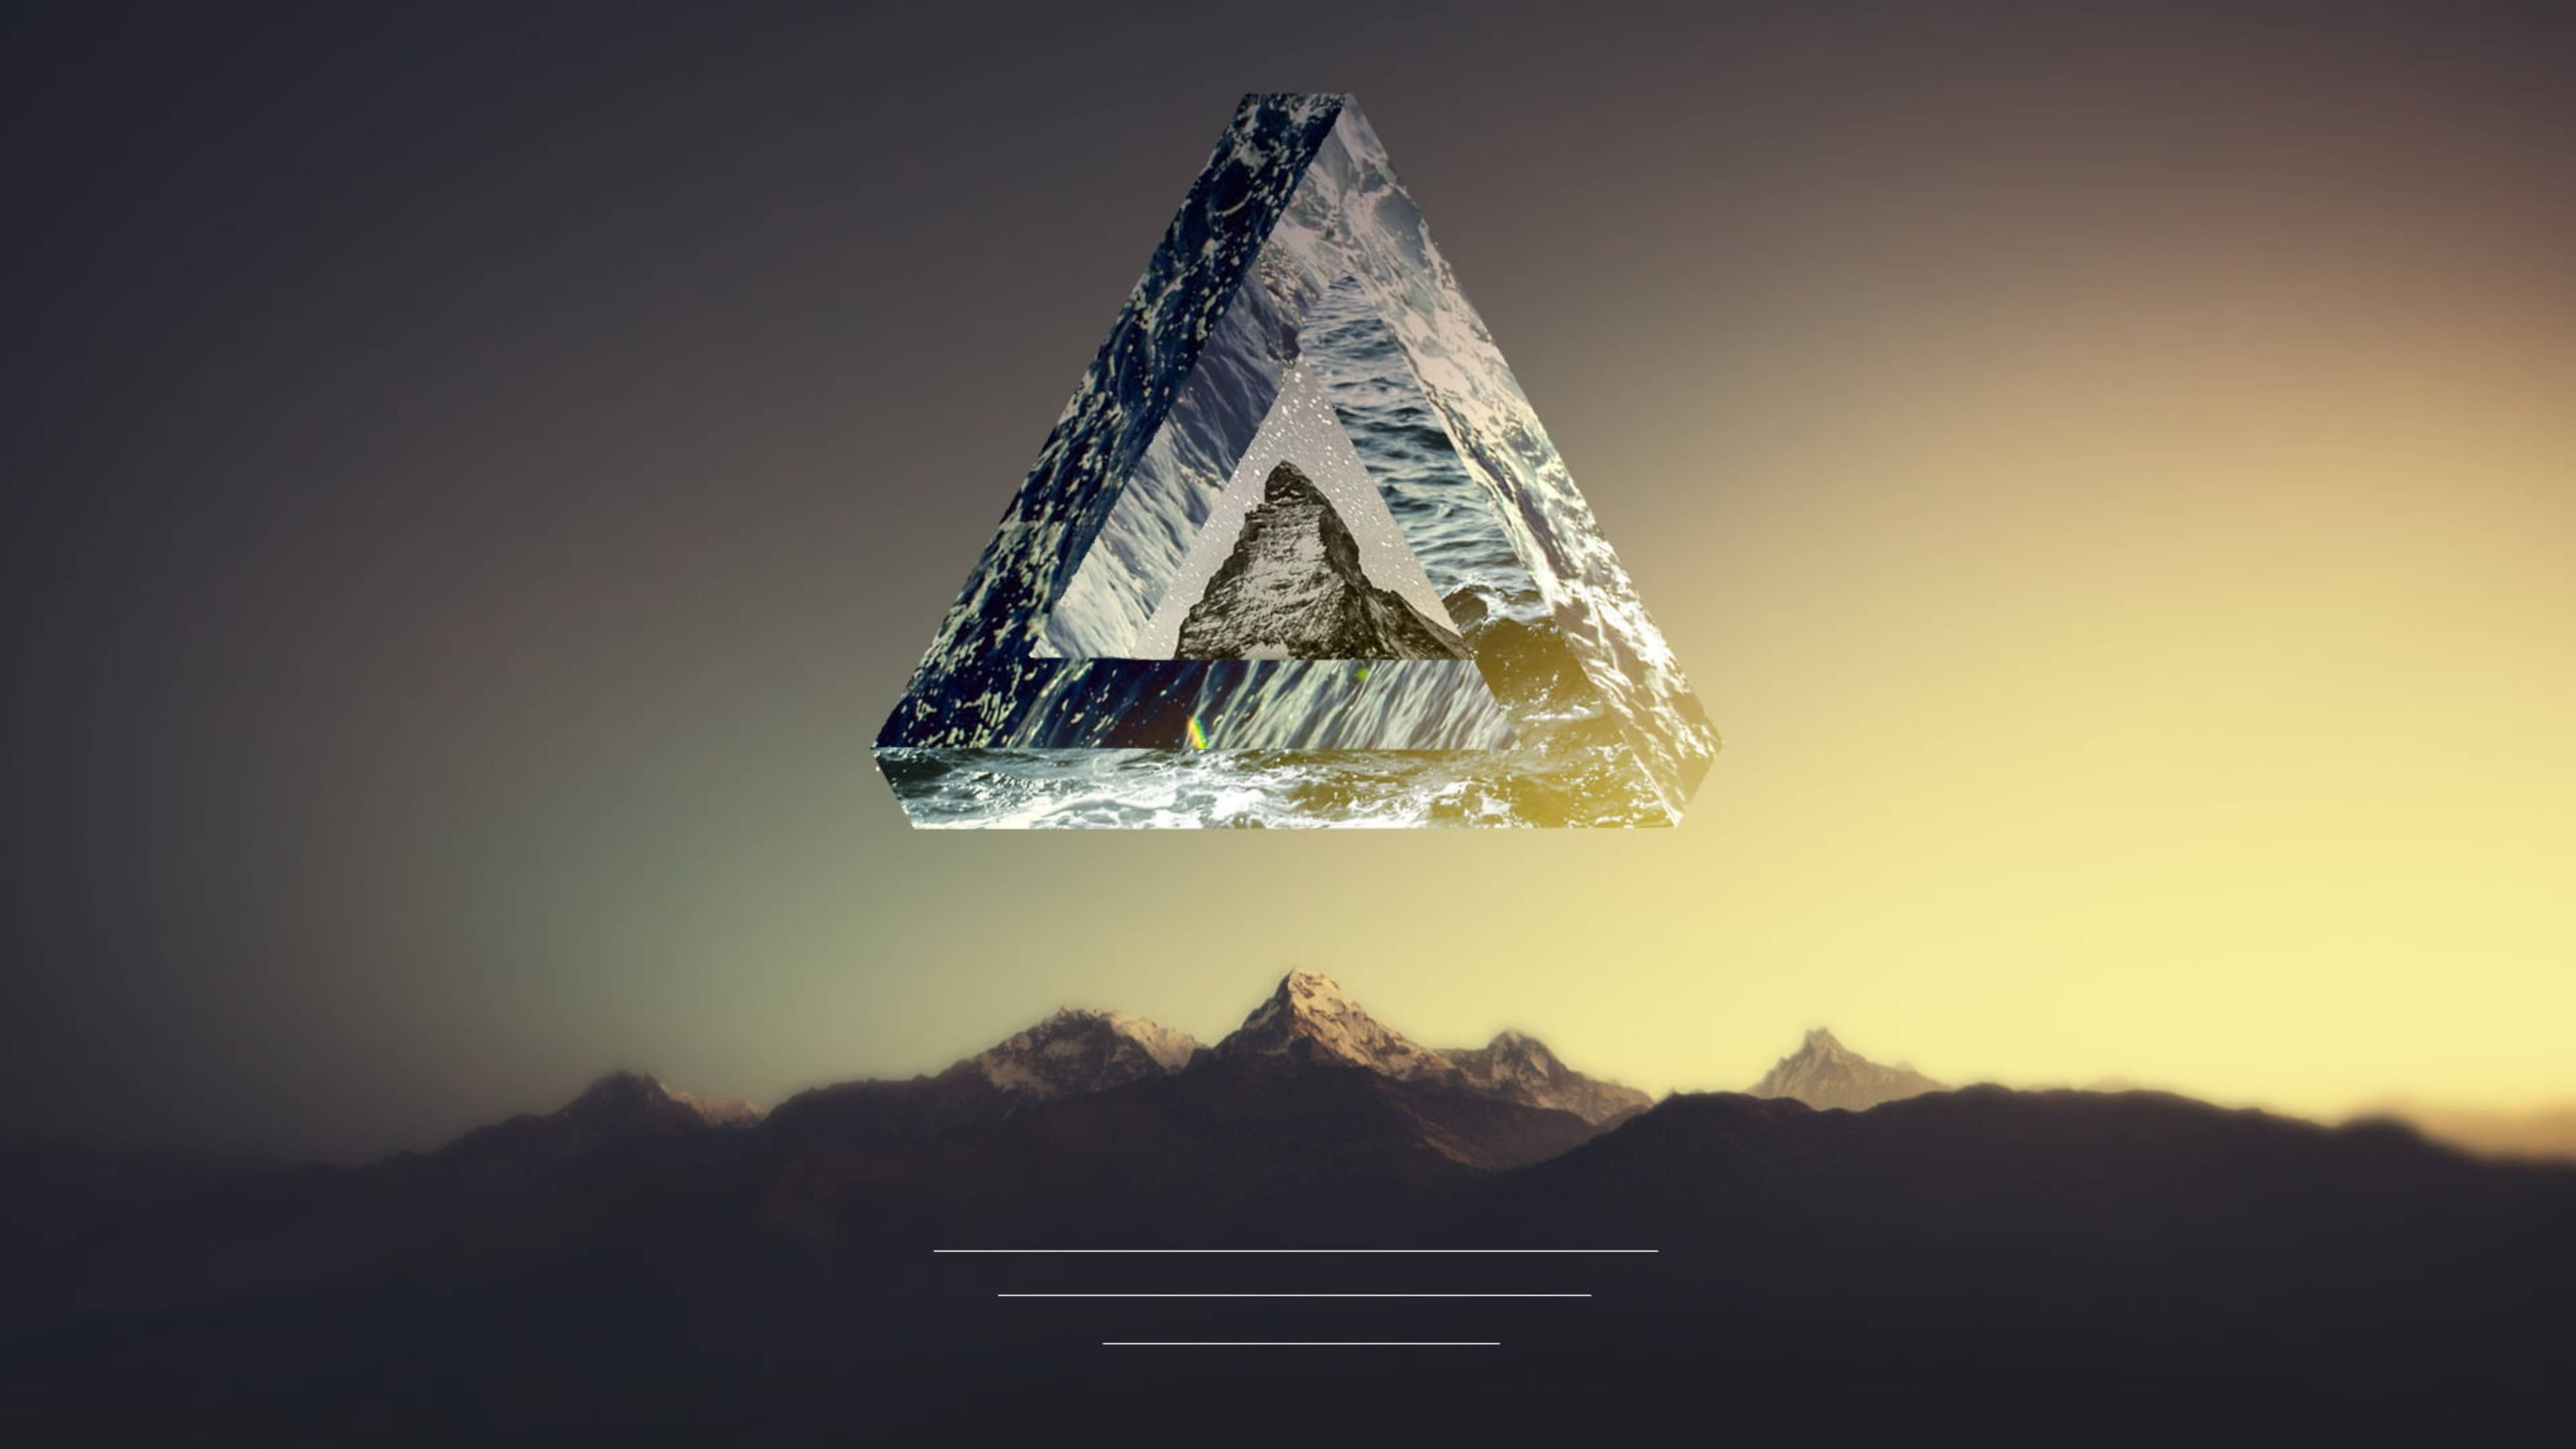 Impossible Triangle Wallpapers